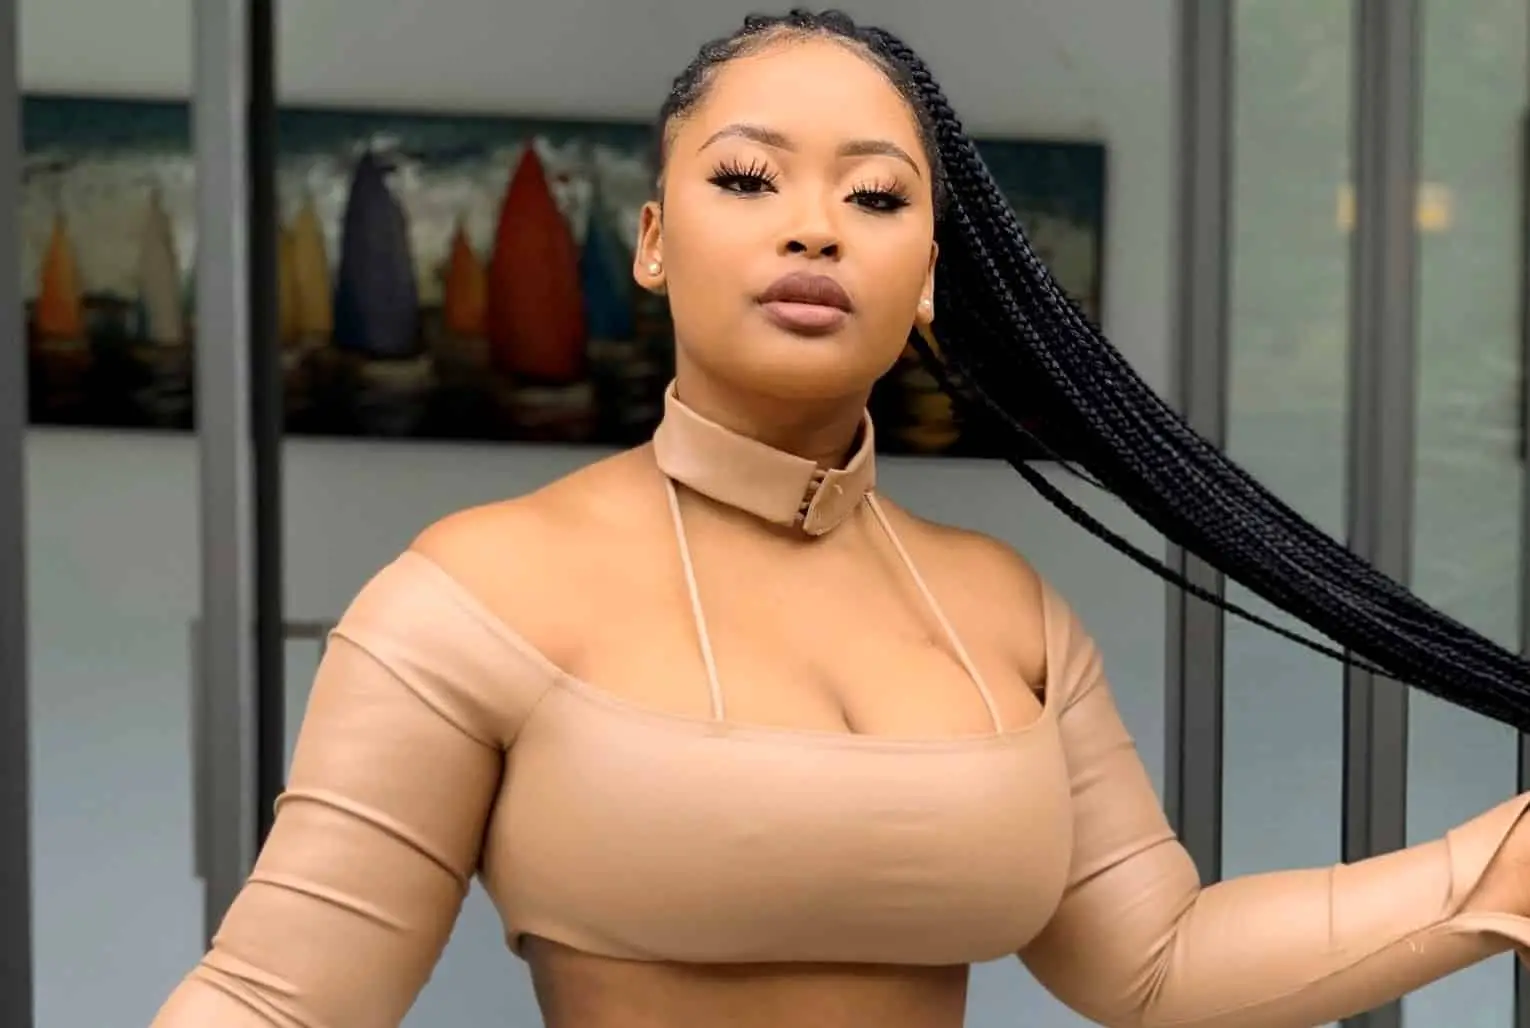 Drama As Cyan Boujee Breaks Up With Boyfriend Days After Splurging R50K On His Birthday